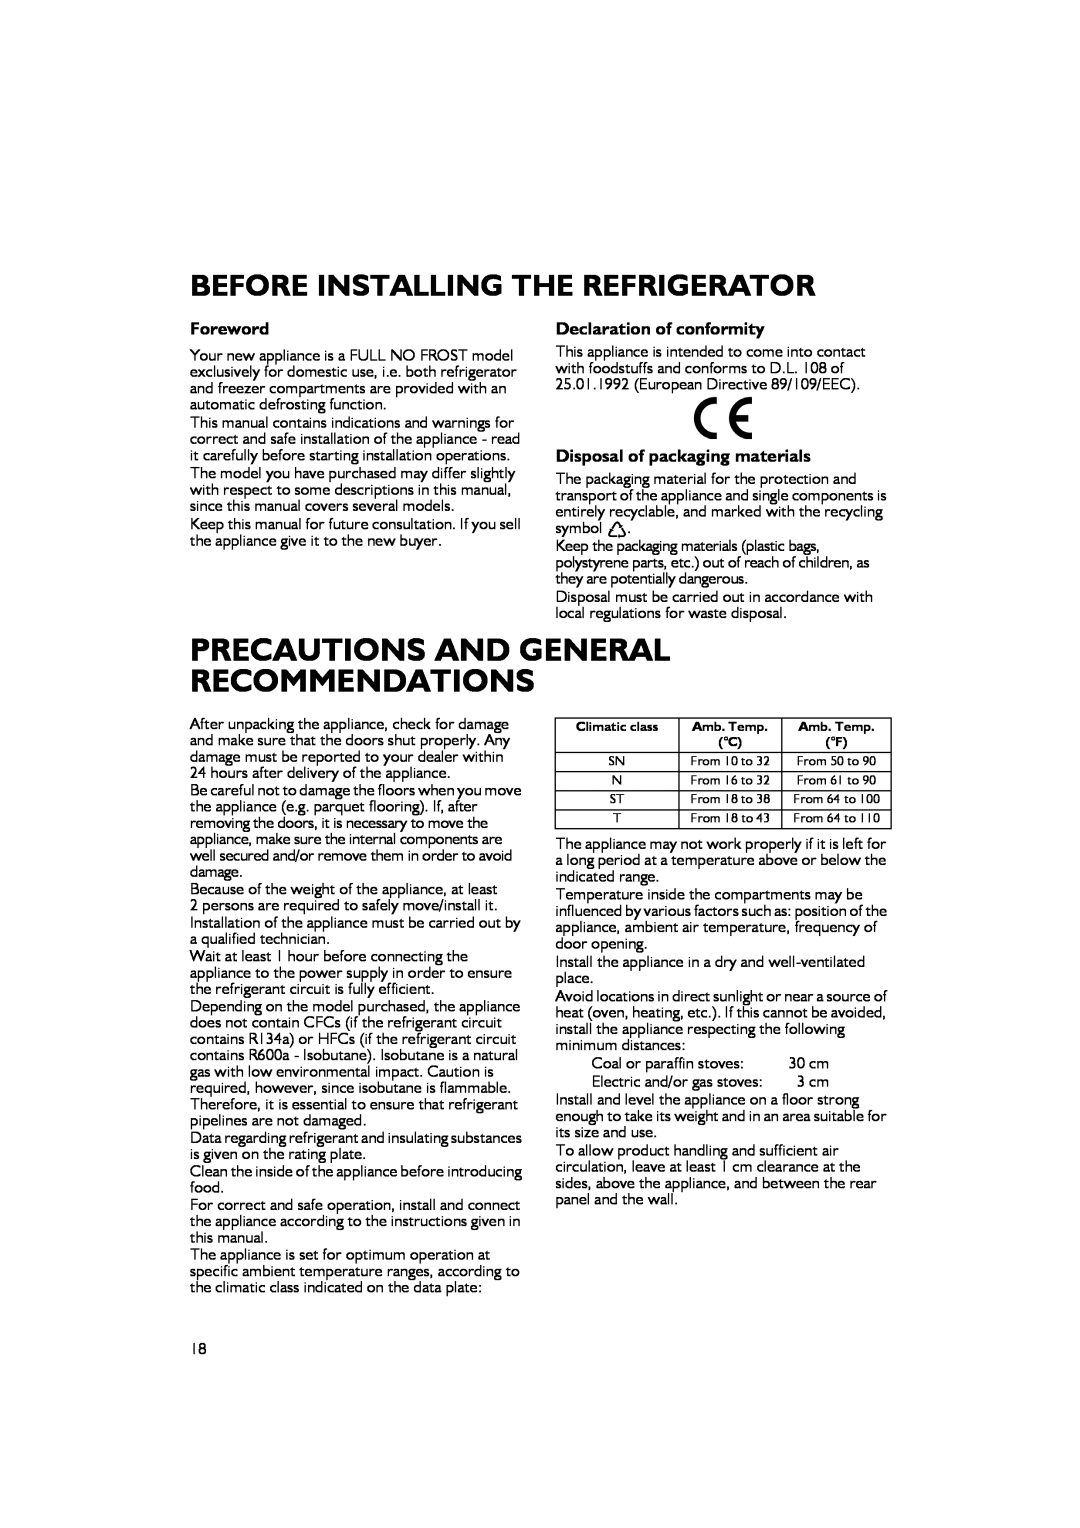 Smeg FA550XBI manual Precautions And General Recommendations, Before Installing The Refrigerator, Foreword 